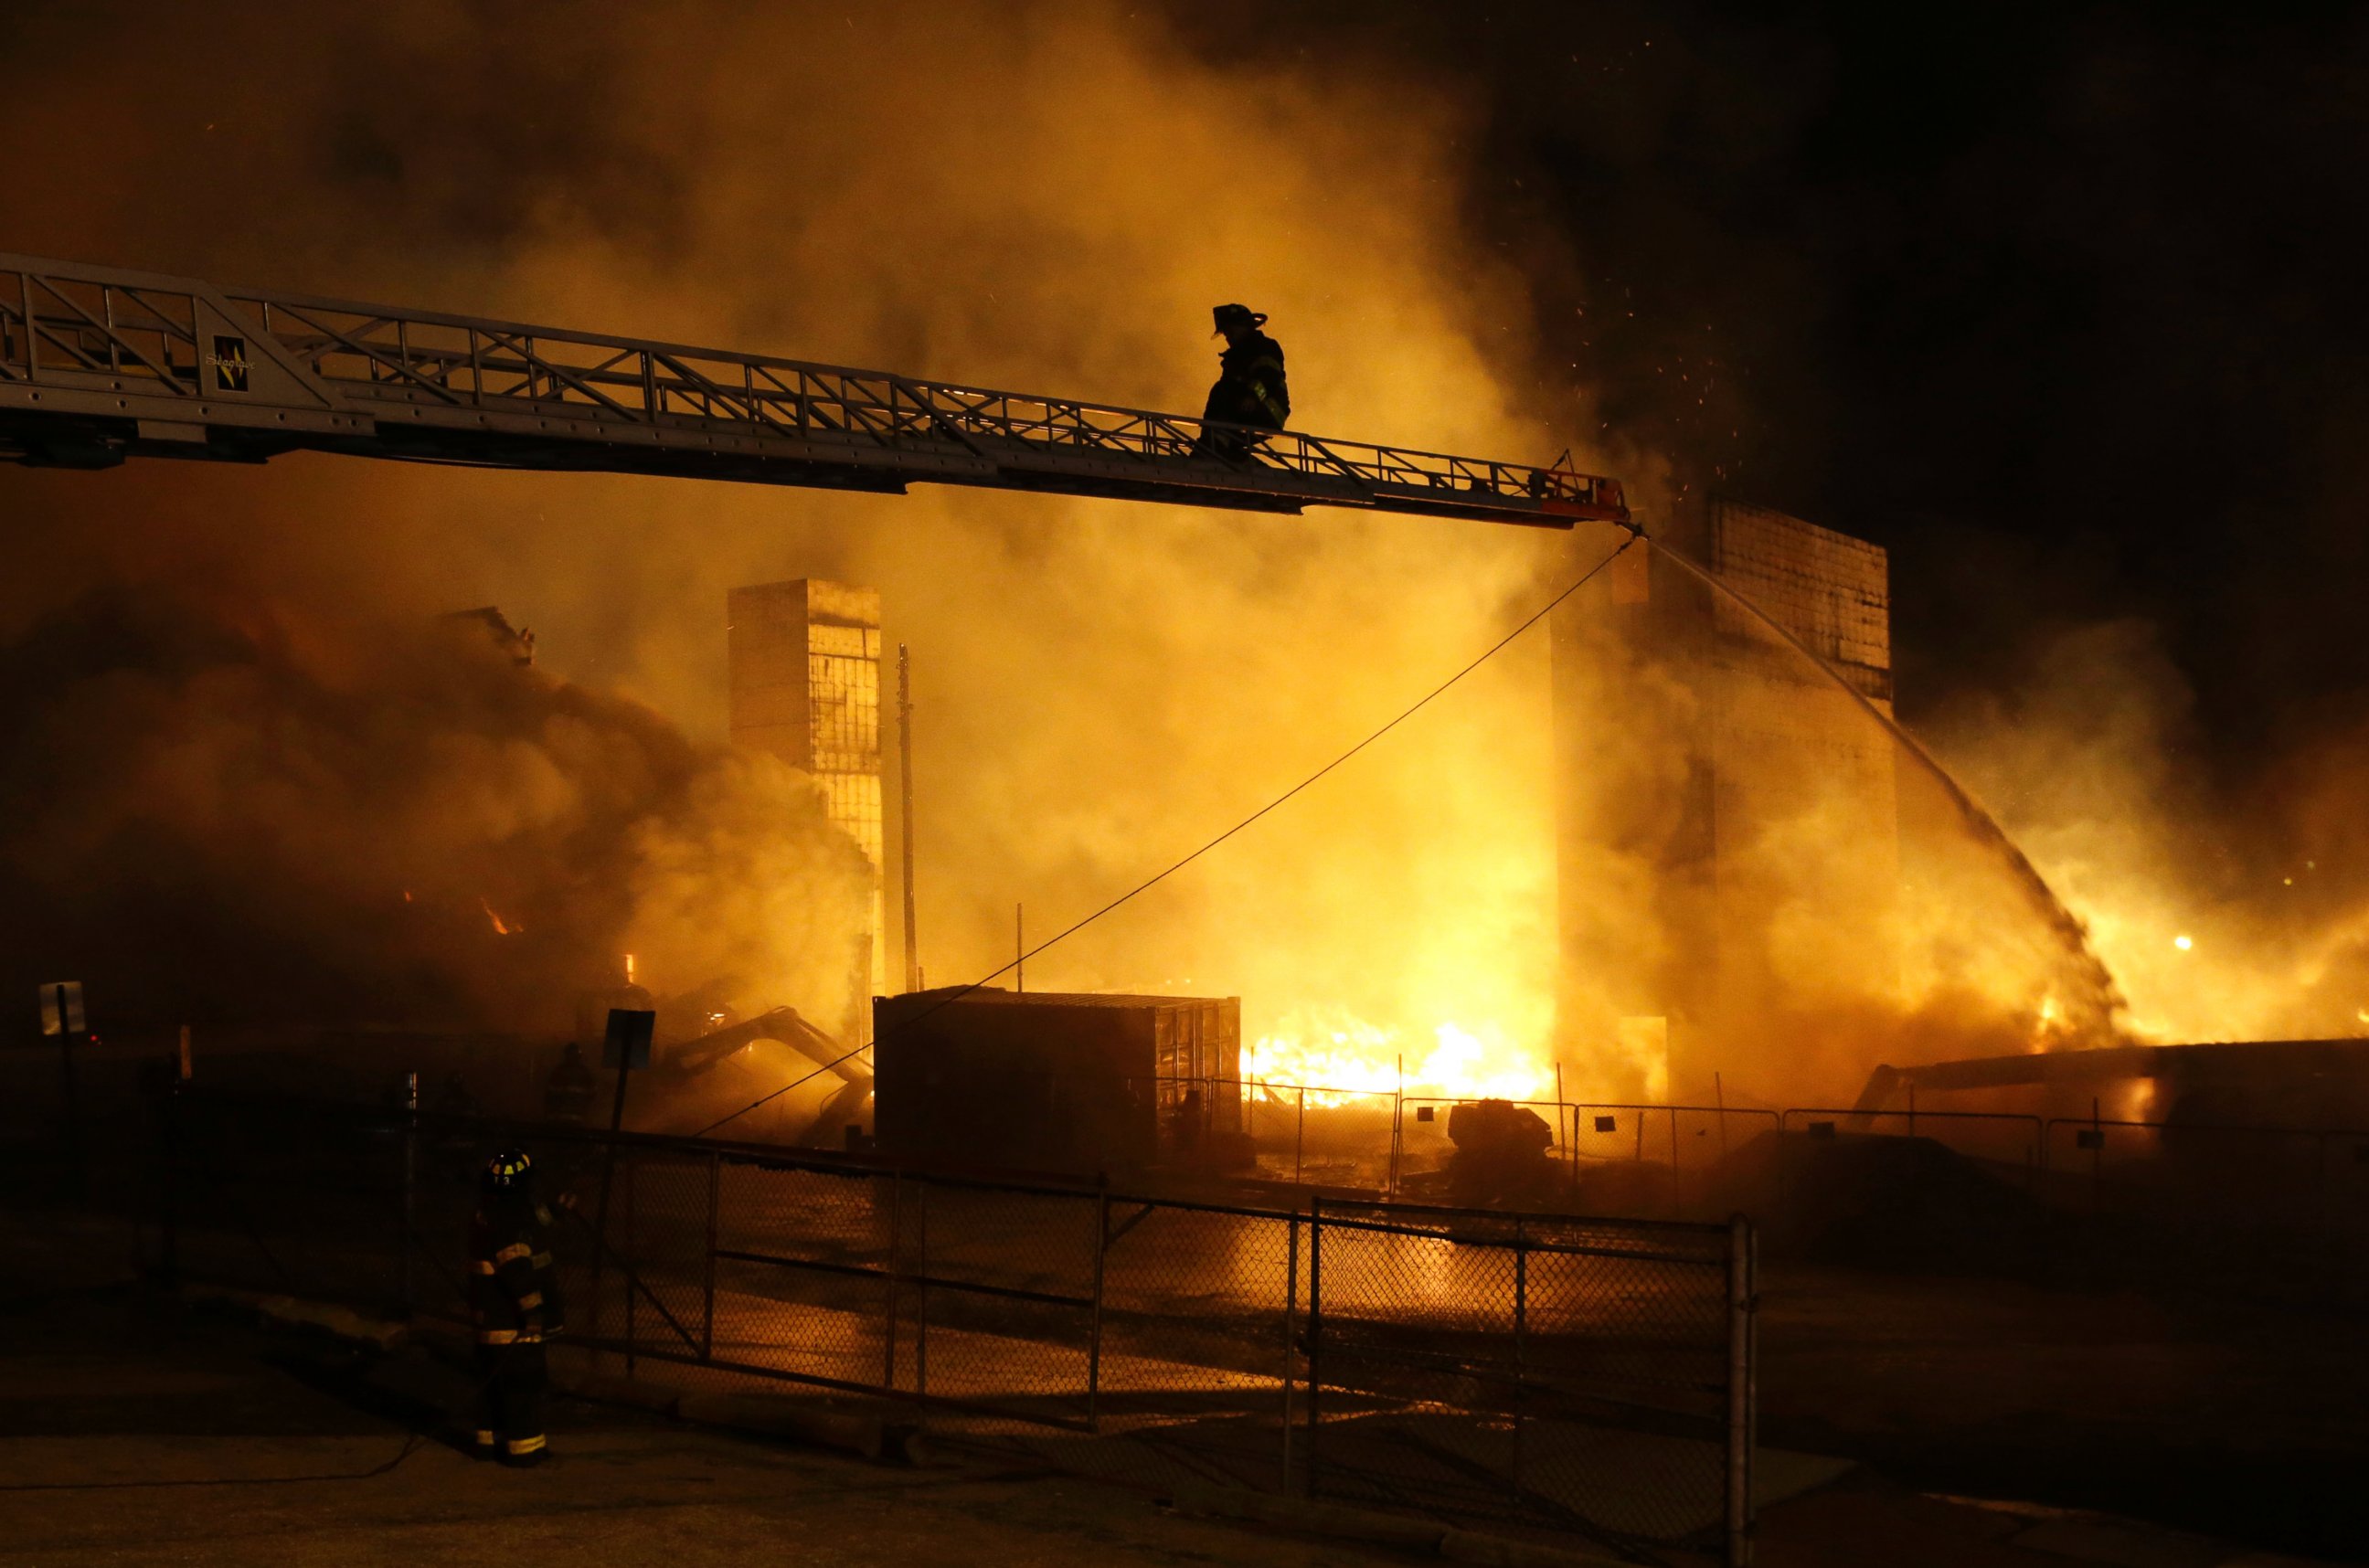 Firefighters battle a blaze, Monday, April 27, 2015, after rioters plunged part of Baltimore into chaos, torching a pharmacy, setting police cars ablaze and throwing bricks at officers.